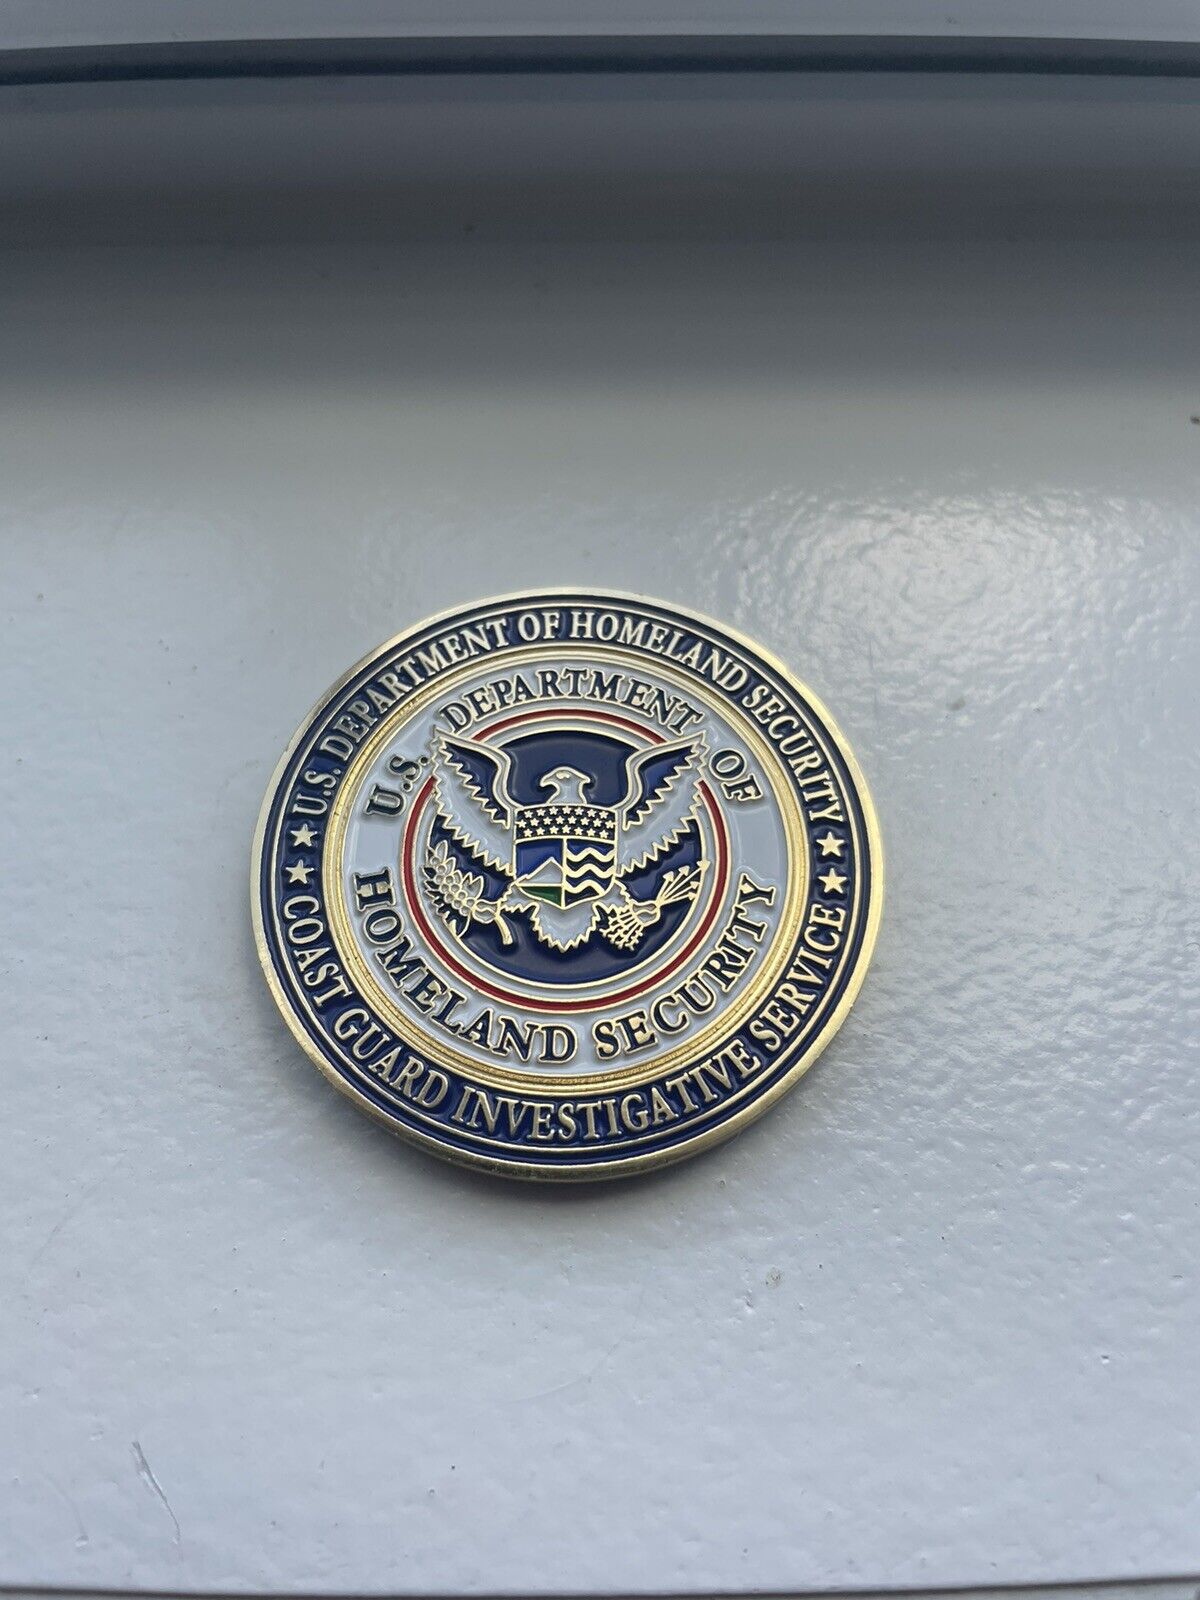 HSI-ATF Military Challenge coin